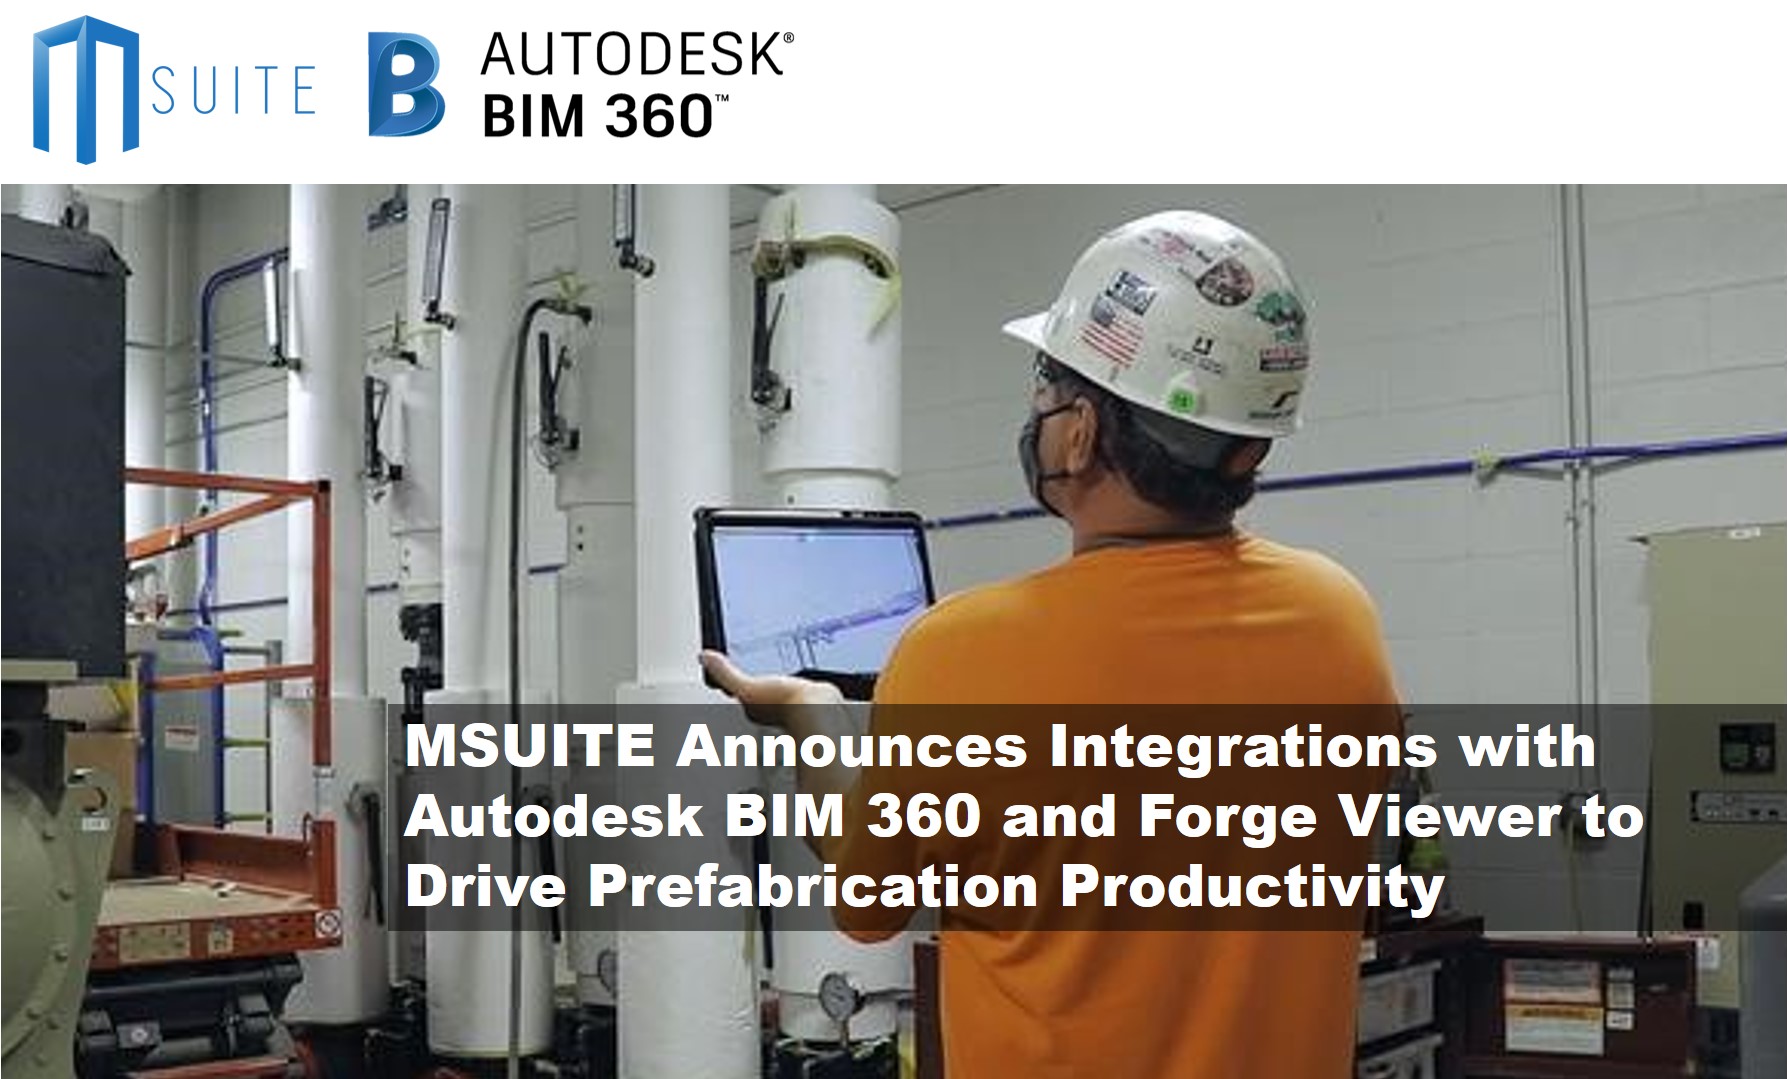 MSUITE Announces Integrations with Autodesk BIM 360 and Forge Viewer